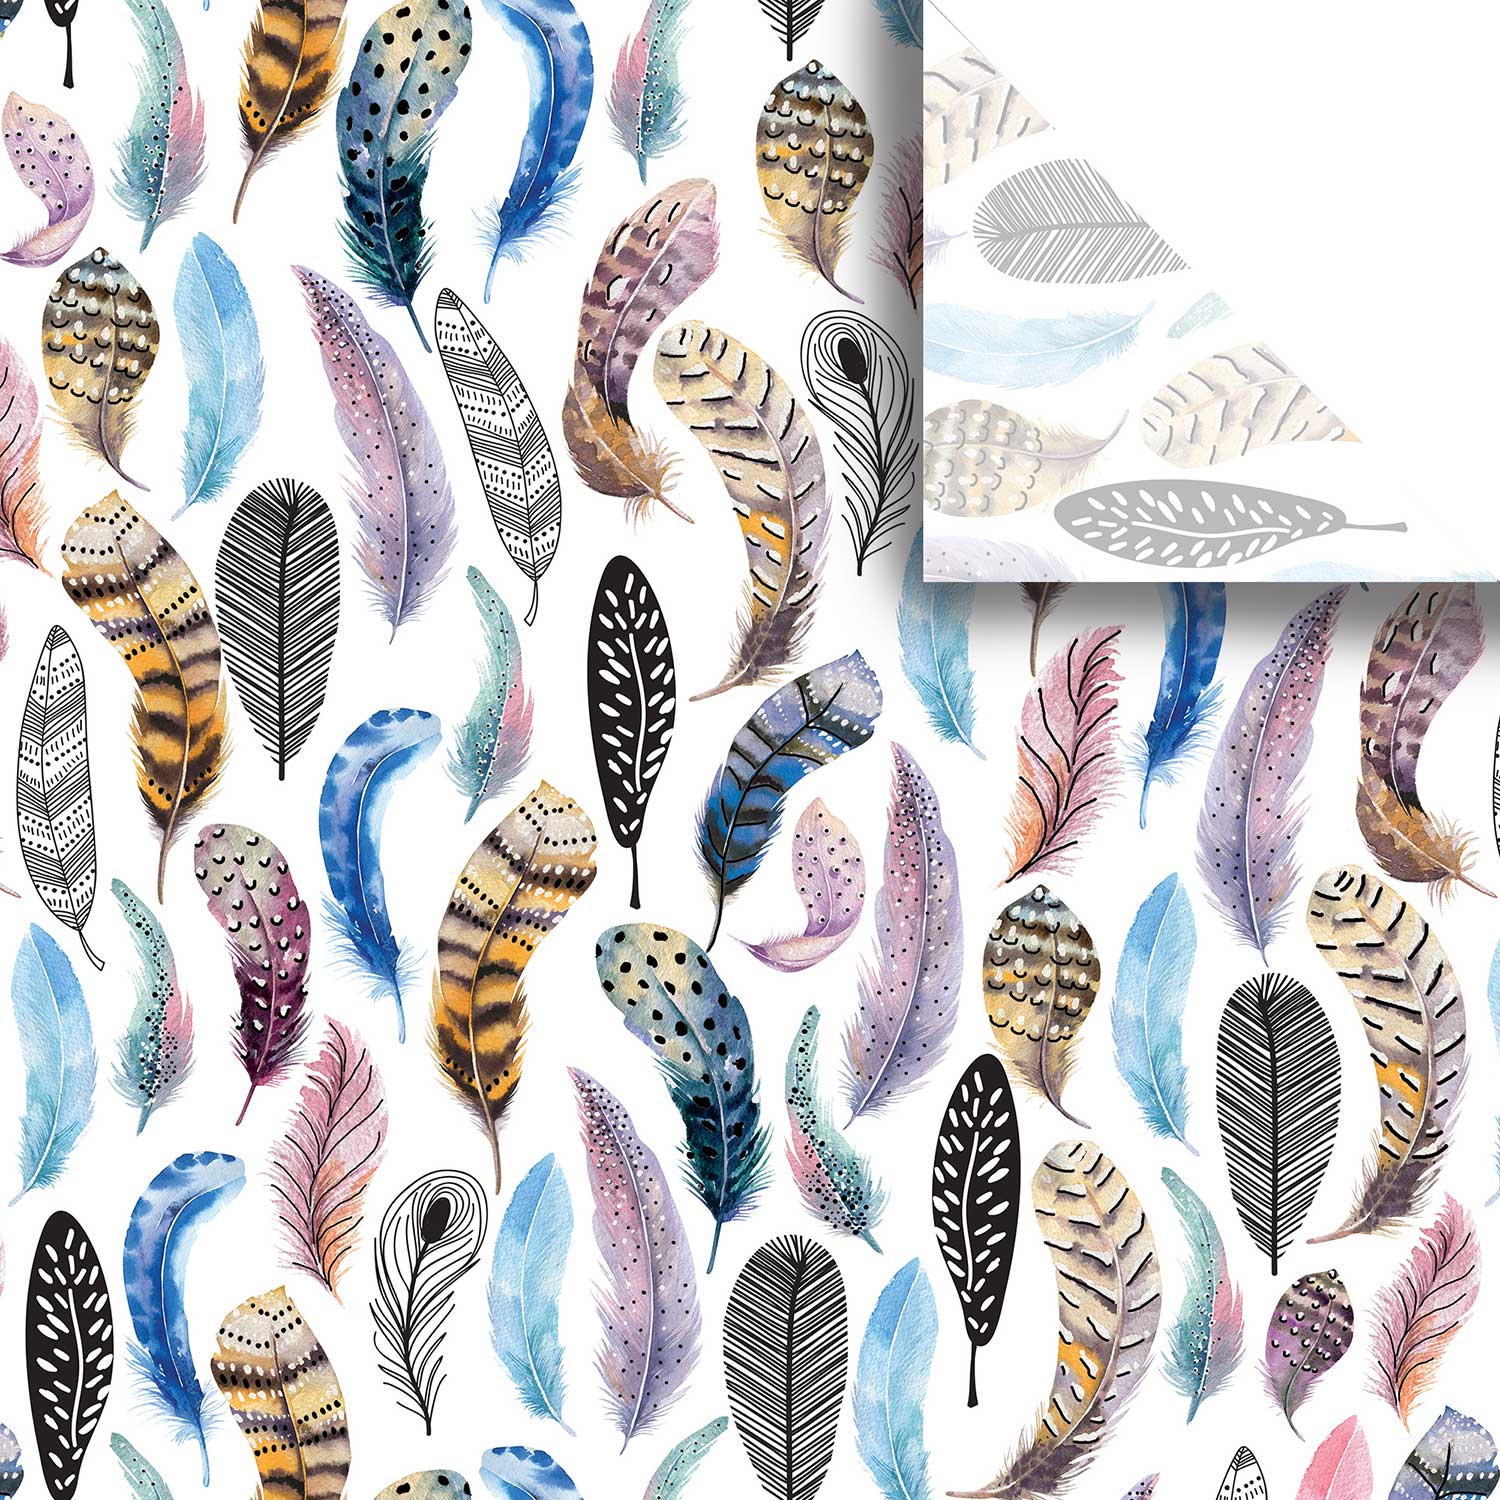 BPT300a Colorful Bird Feathers Tissue Paper Swatch